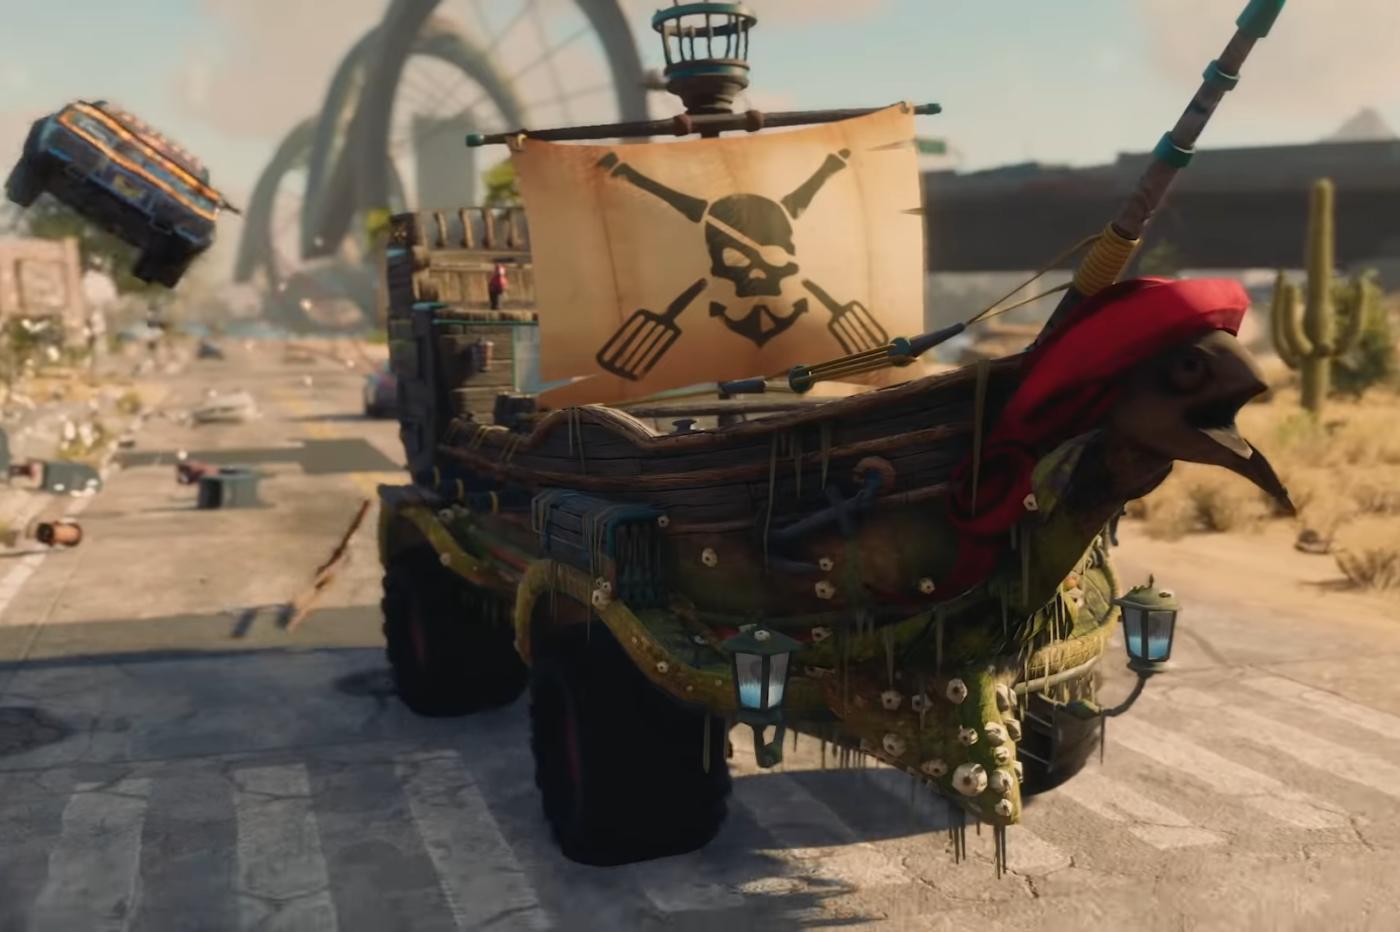 Pirate ship car from the Saints Row trailer